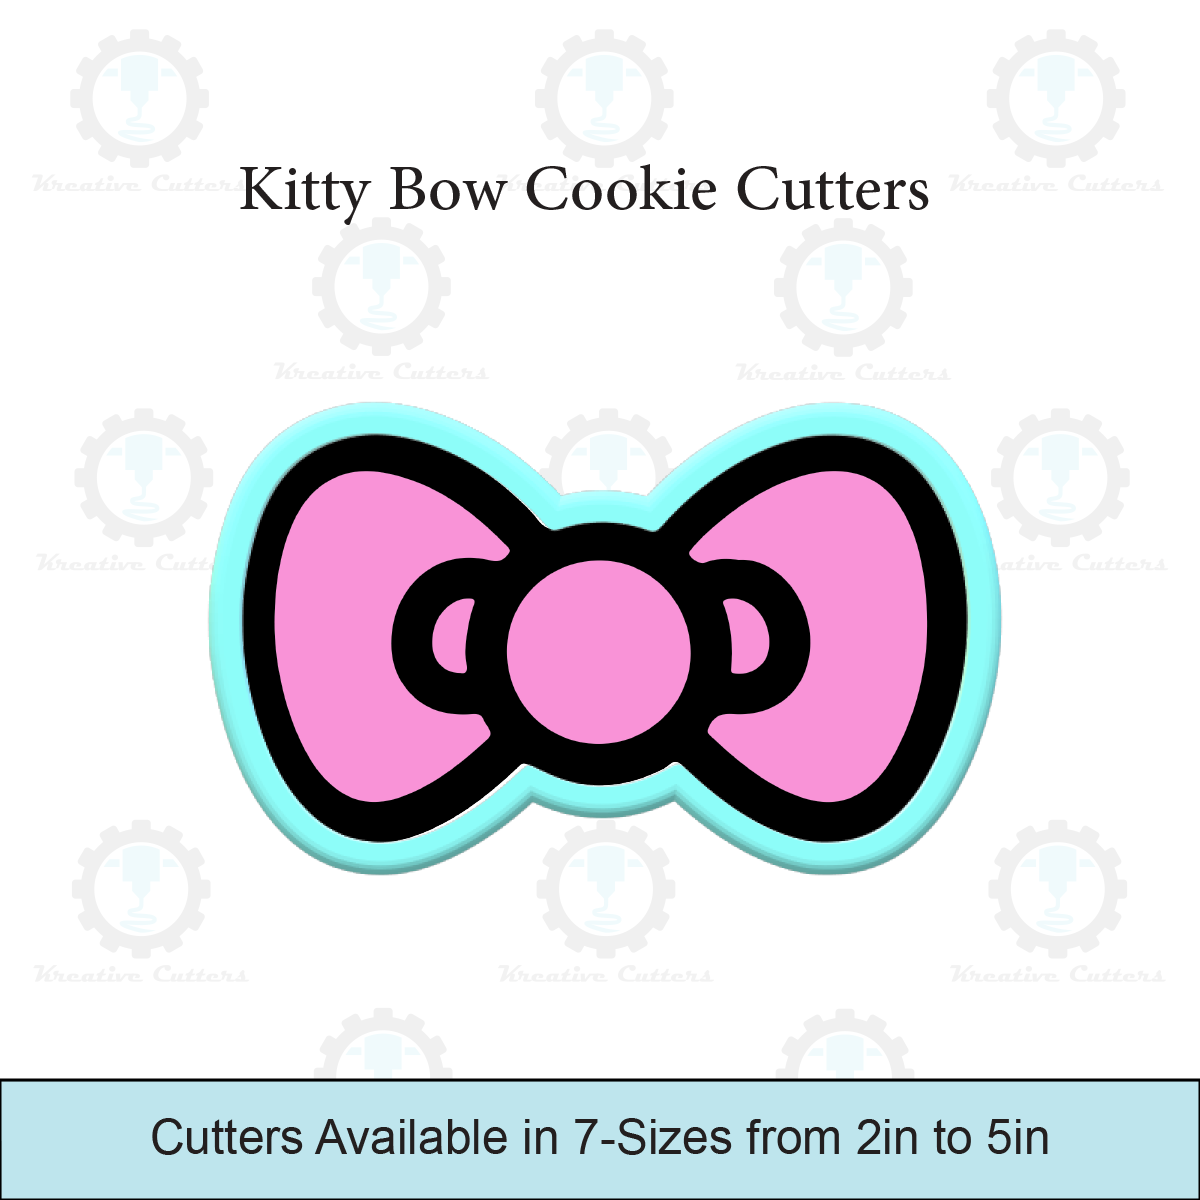 Kitty Bow Cookie Cutters